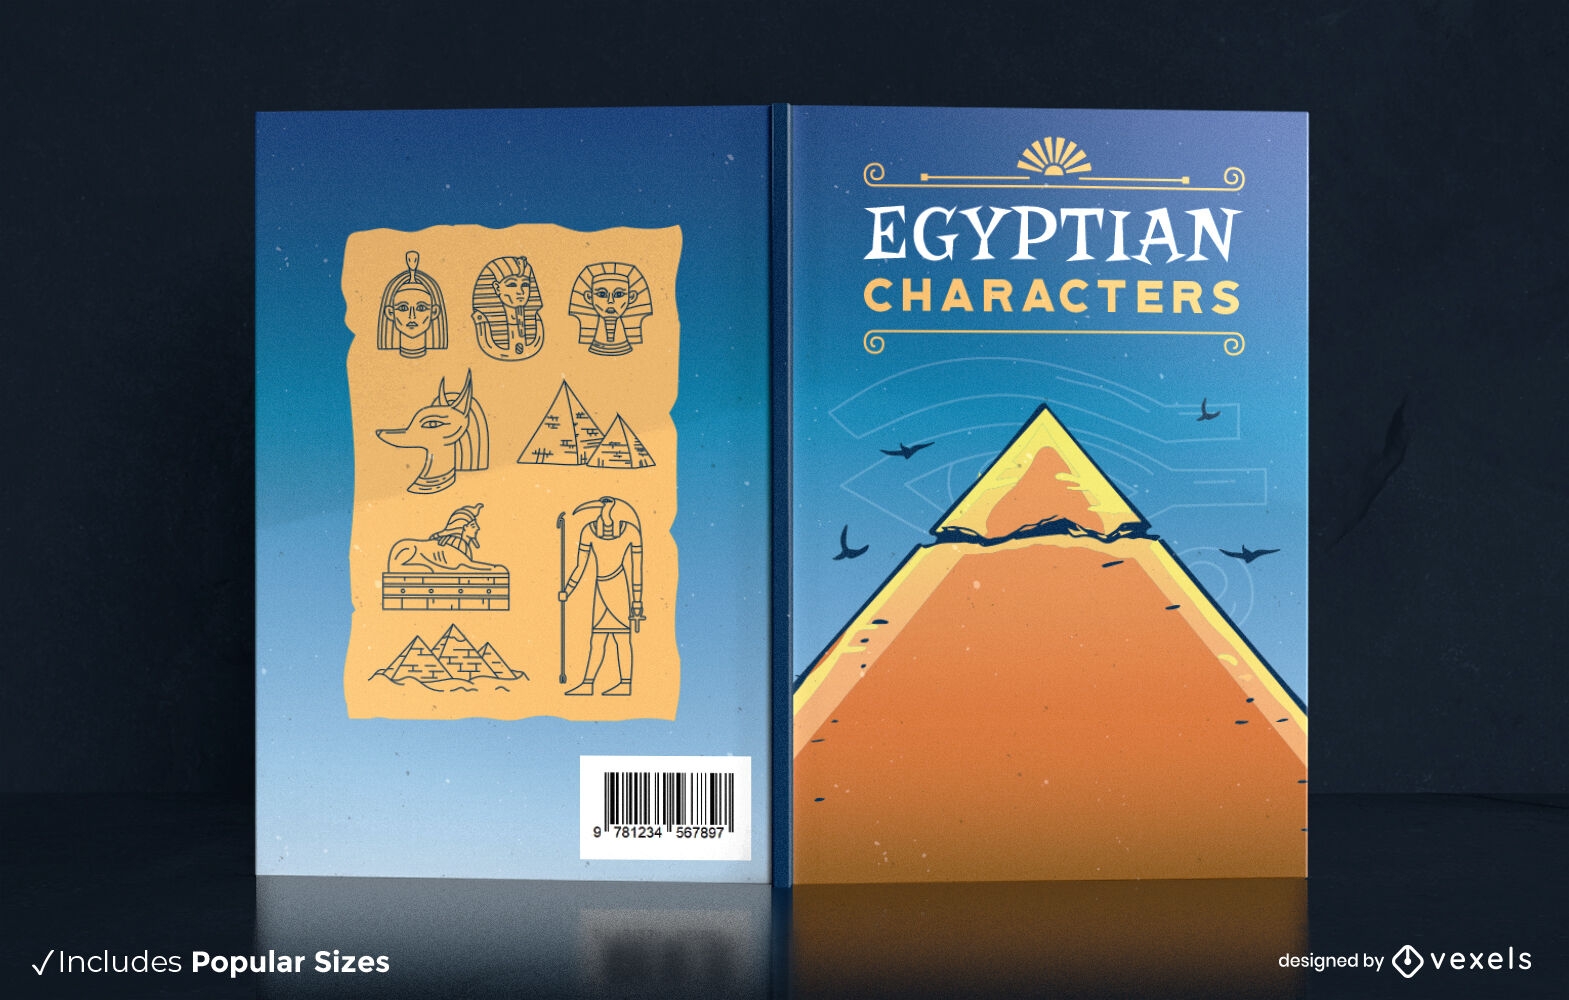 Egyptian characters book cover design